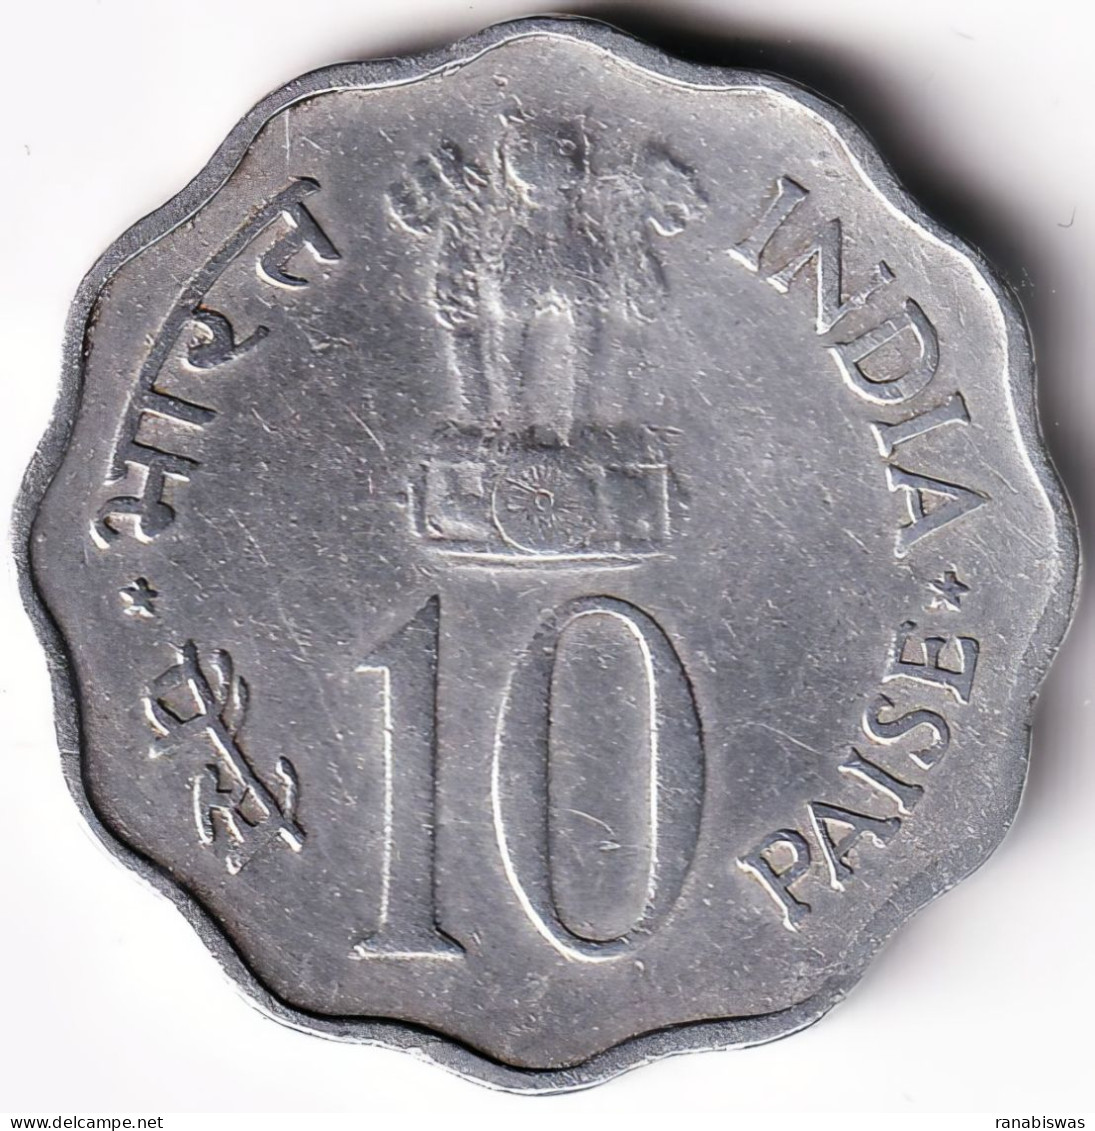 INDIA COIN LOT 91, 10 PAISE 1976, FOOD & WORK FOR ALL, FAO, BOMBAY MINT, XF - Indien